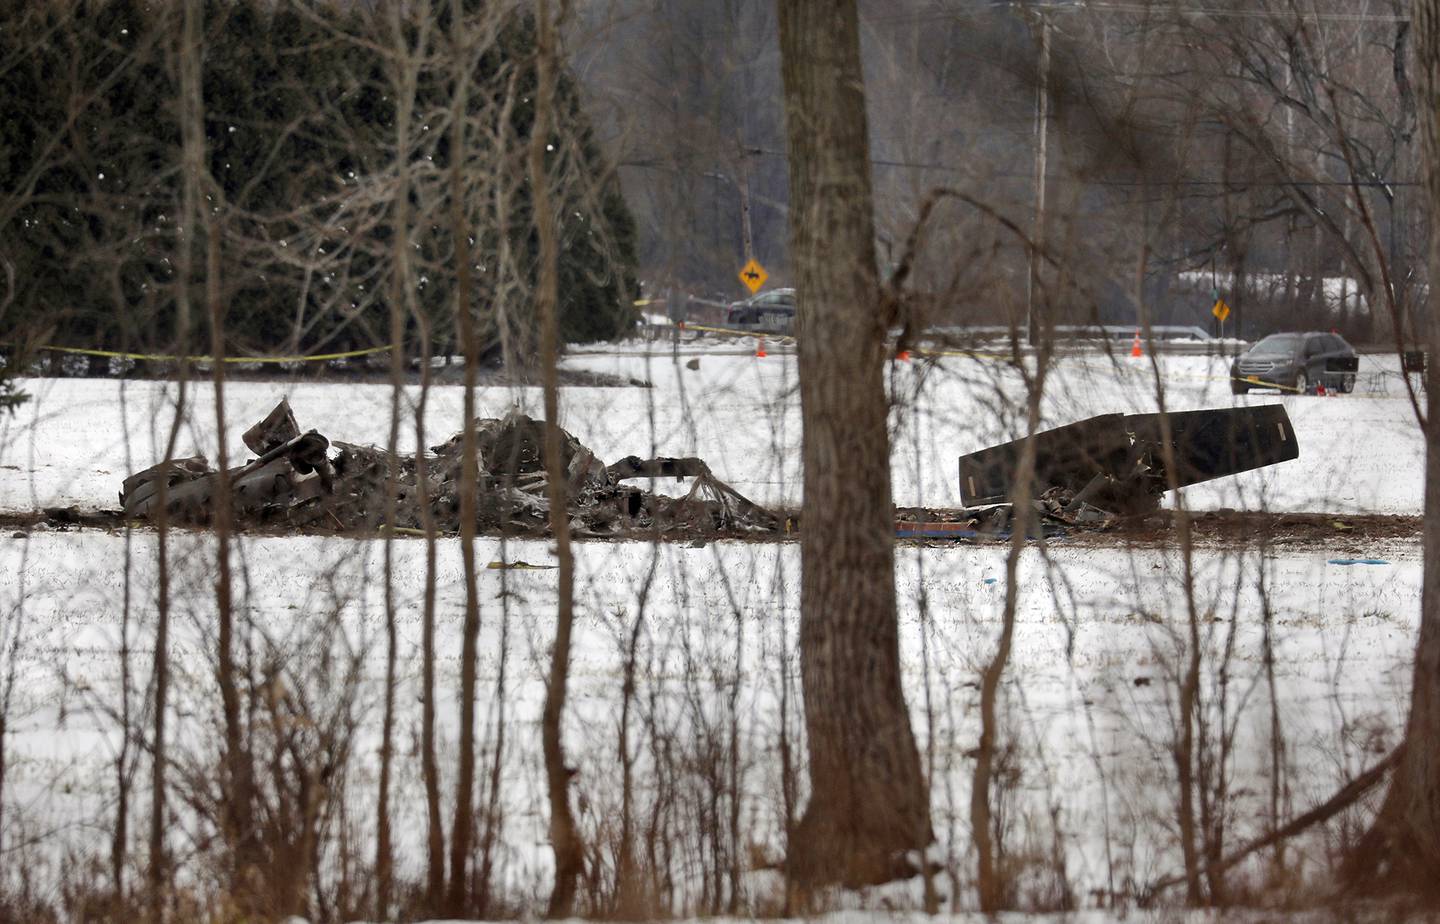 The wreckage of a UH-60 Black Hawk medical evacuation helicopter sits in a field in Mendon, NY., Thursday, Jan. 21, 2021.